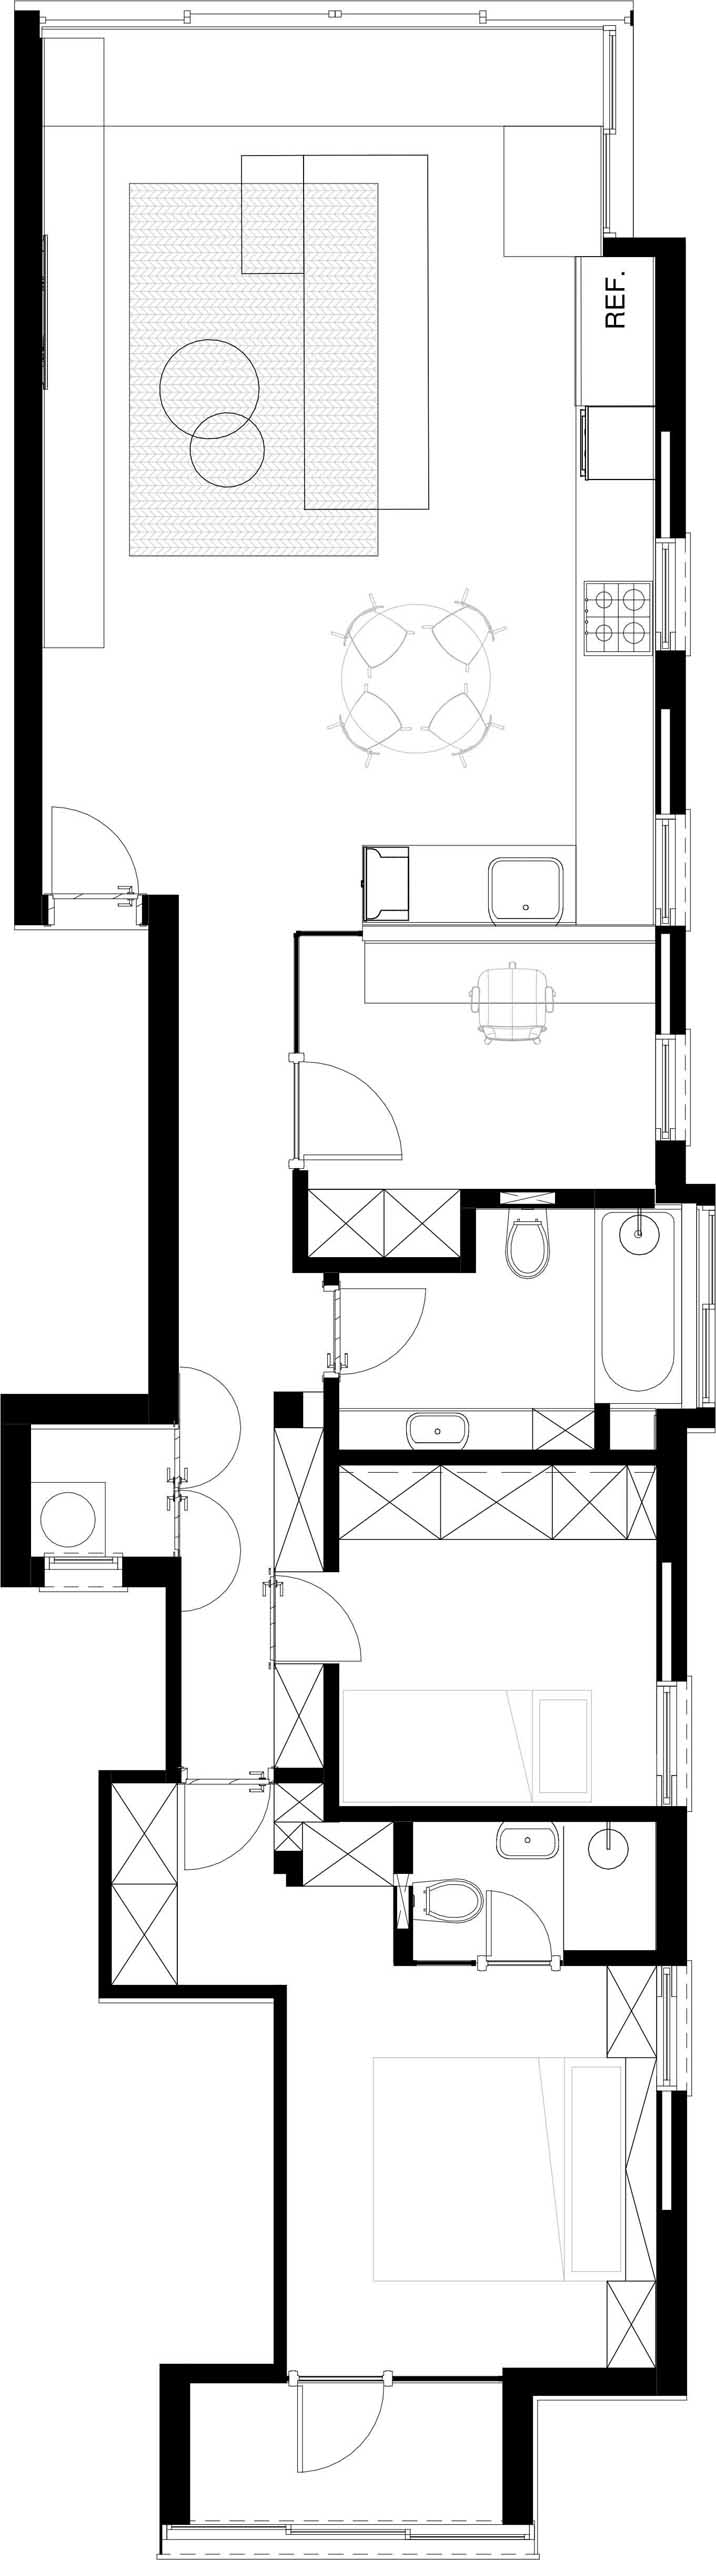 The floor plan of a modern apartment with a home office and two bedrooms.